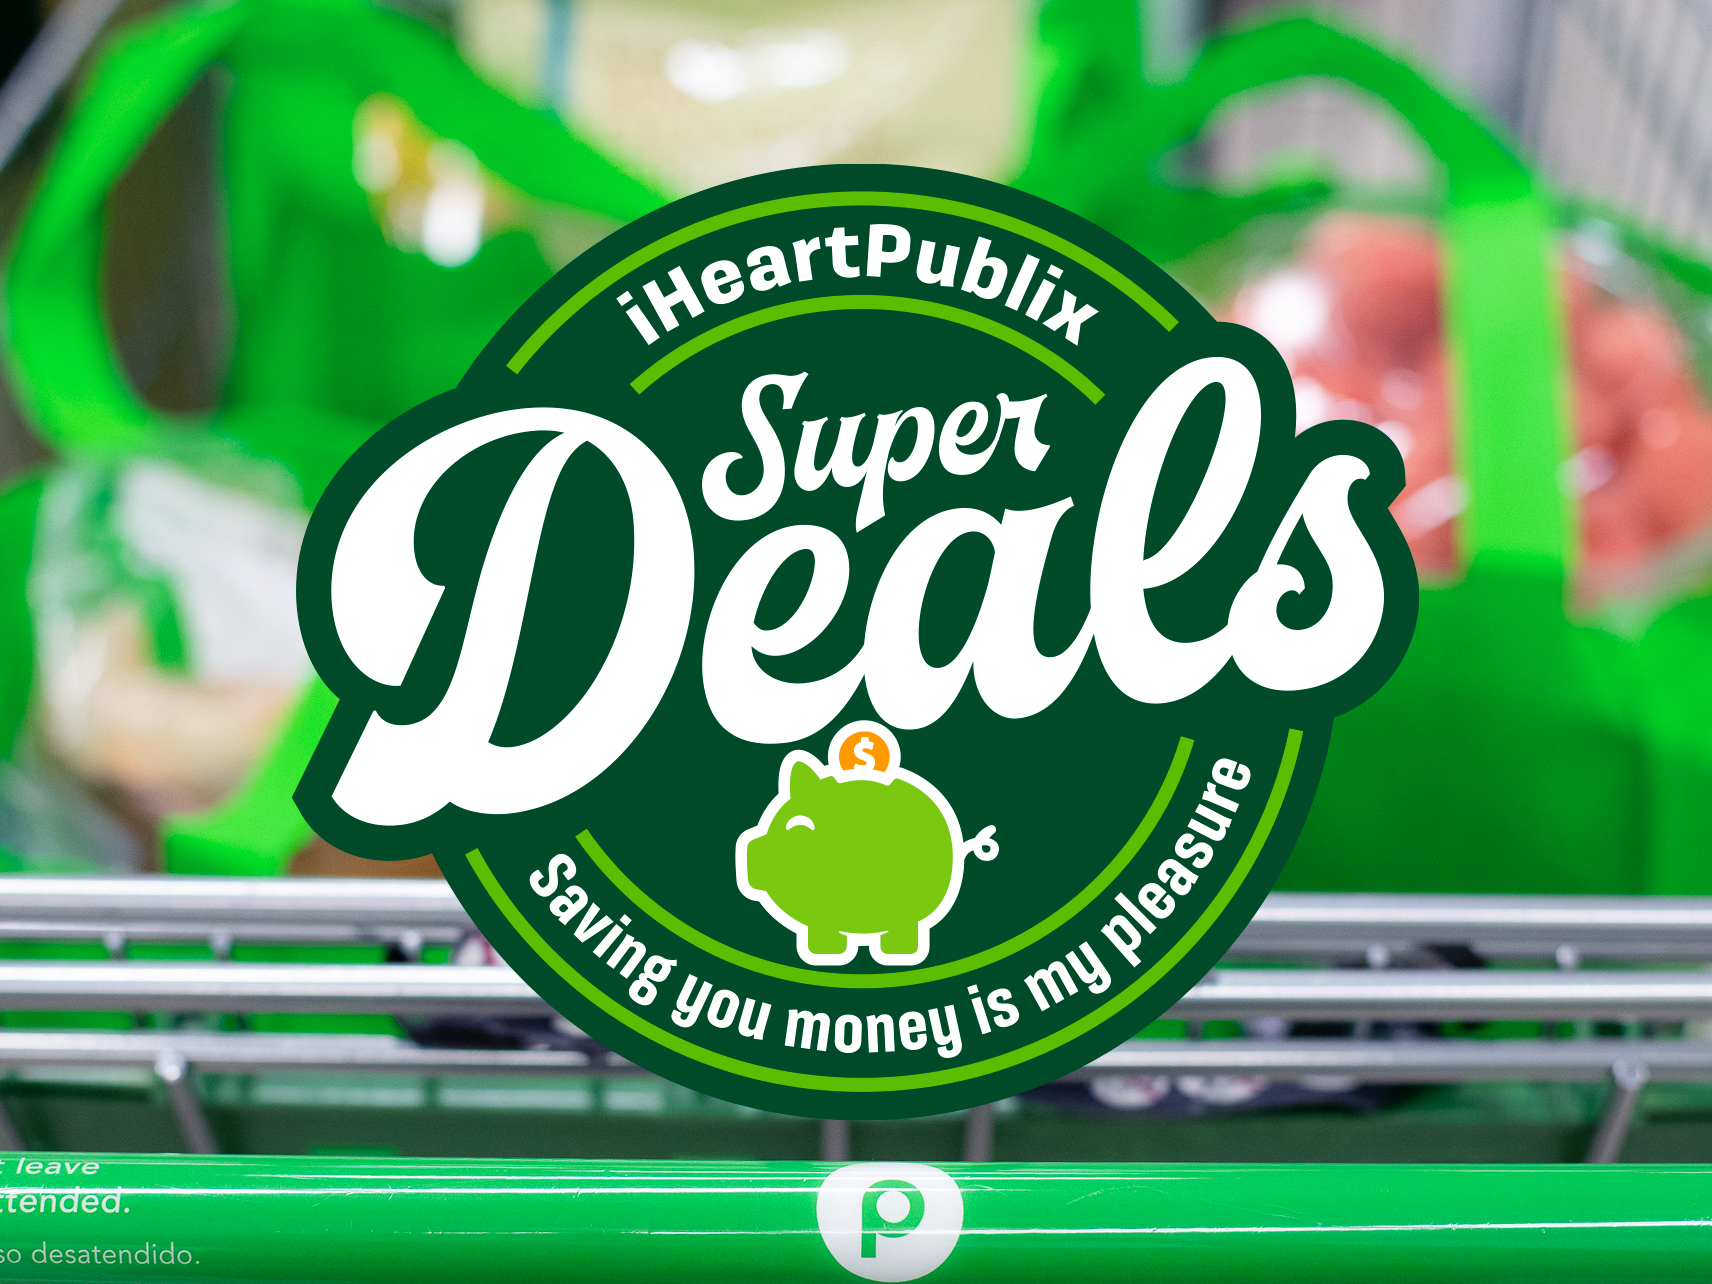 Publix Super Deals Week Of 9/22 to 9/28 (9/21 to 9/27 For Some)